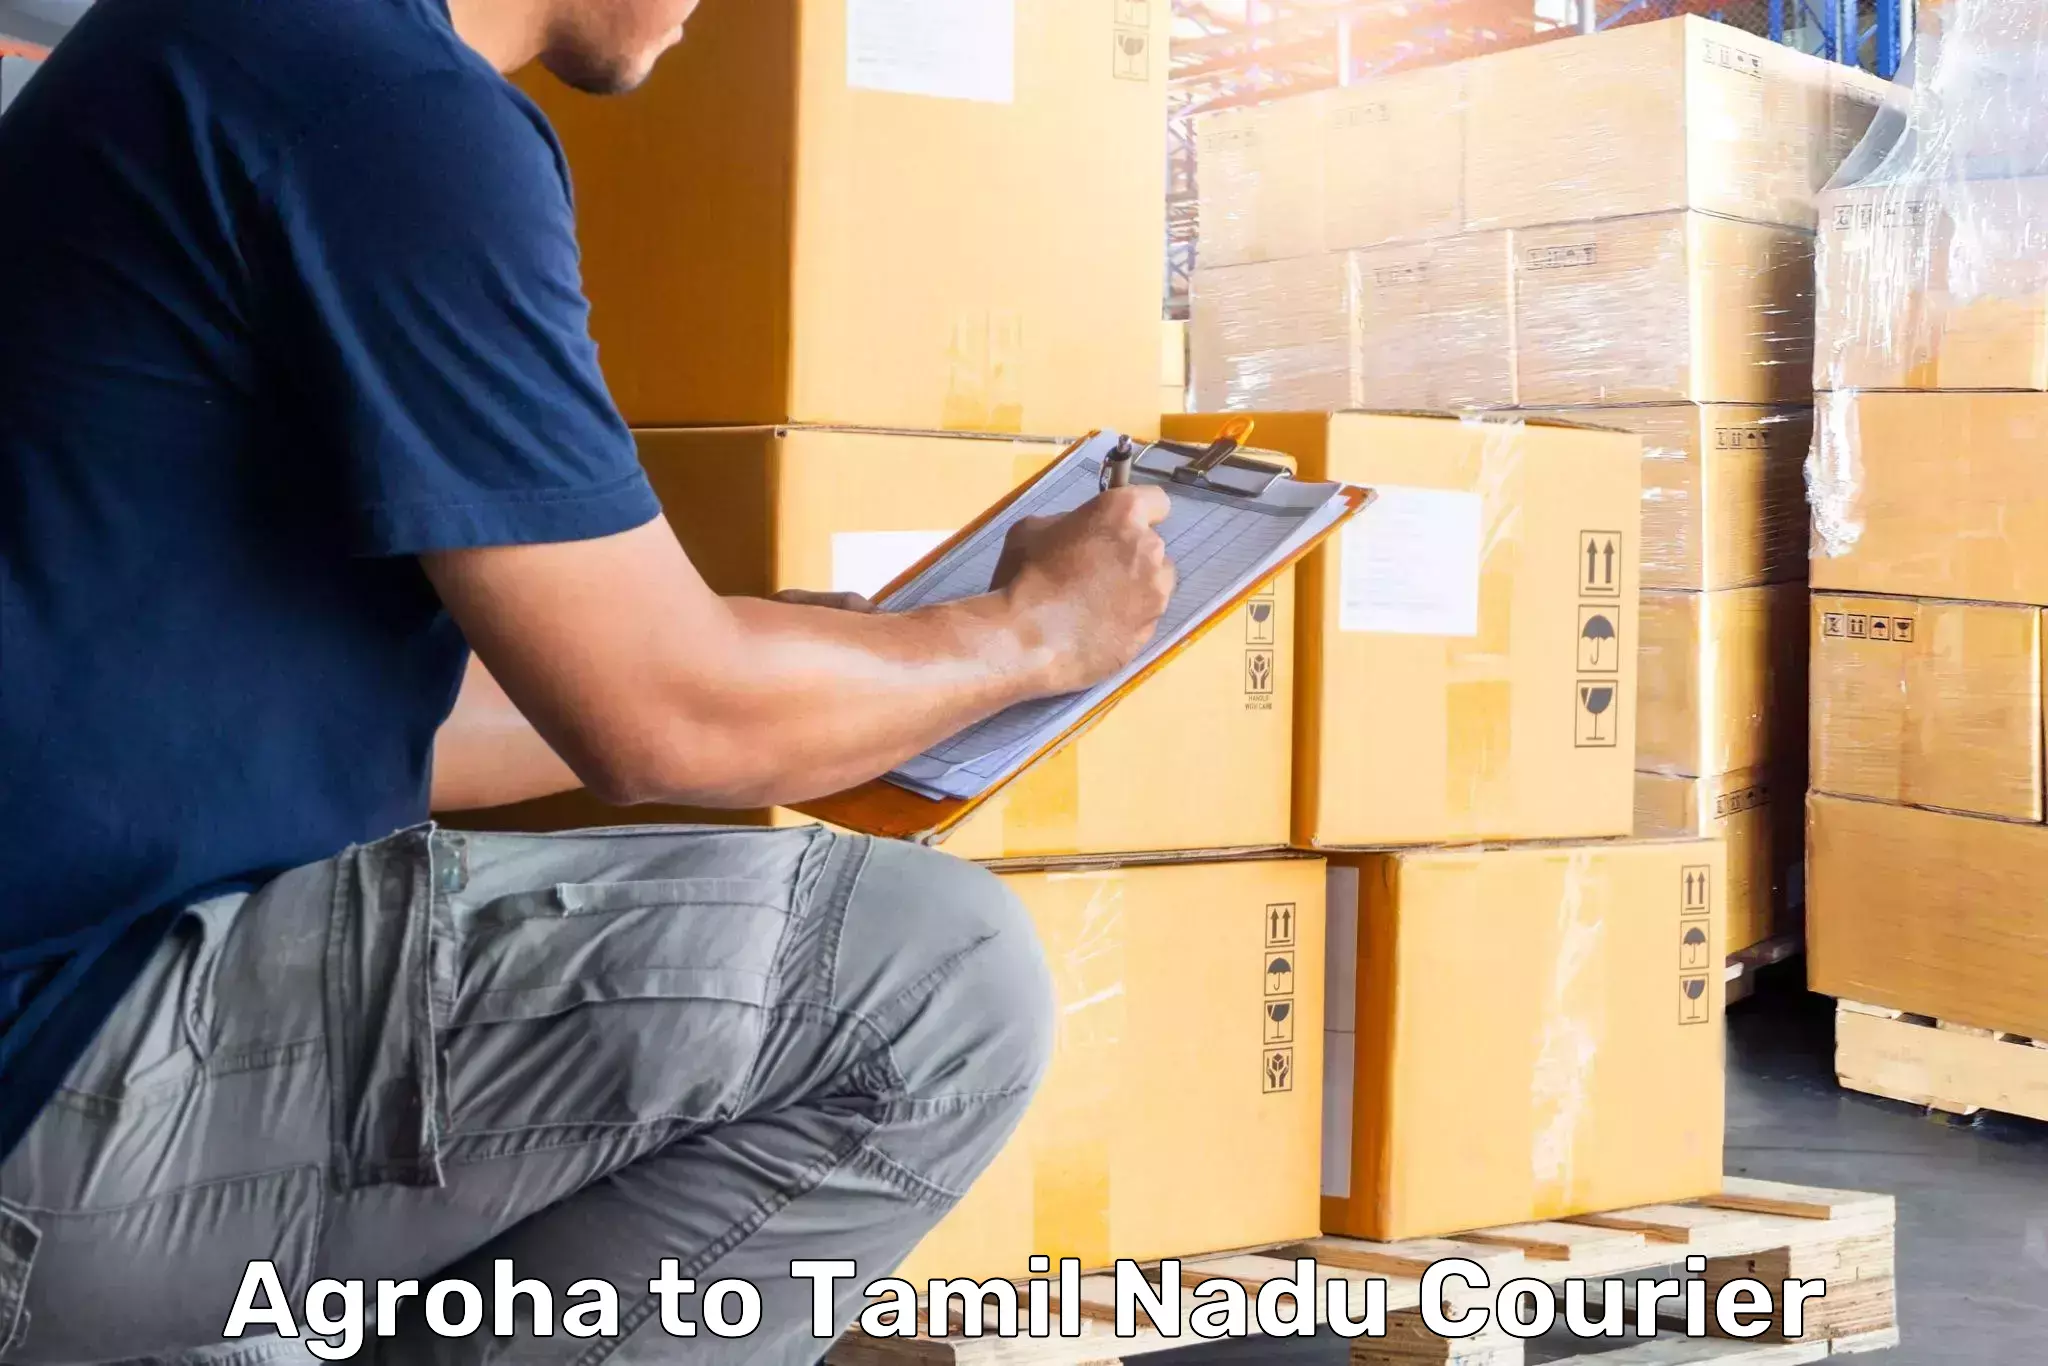 Baggage shipping experience Agroha to Korattur